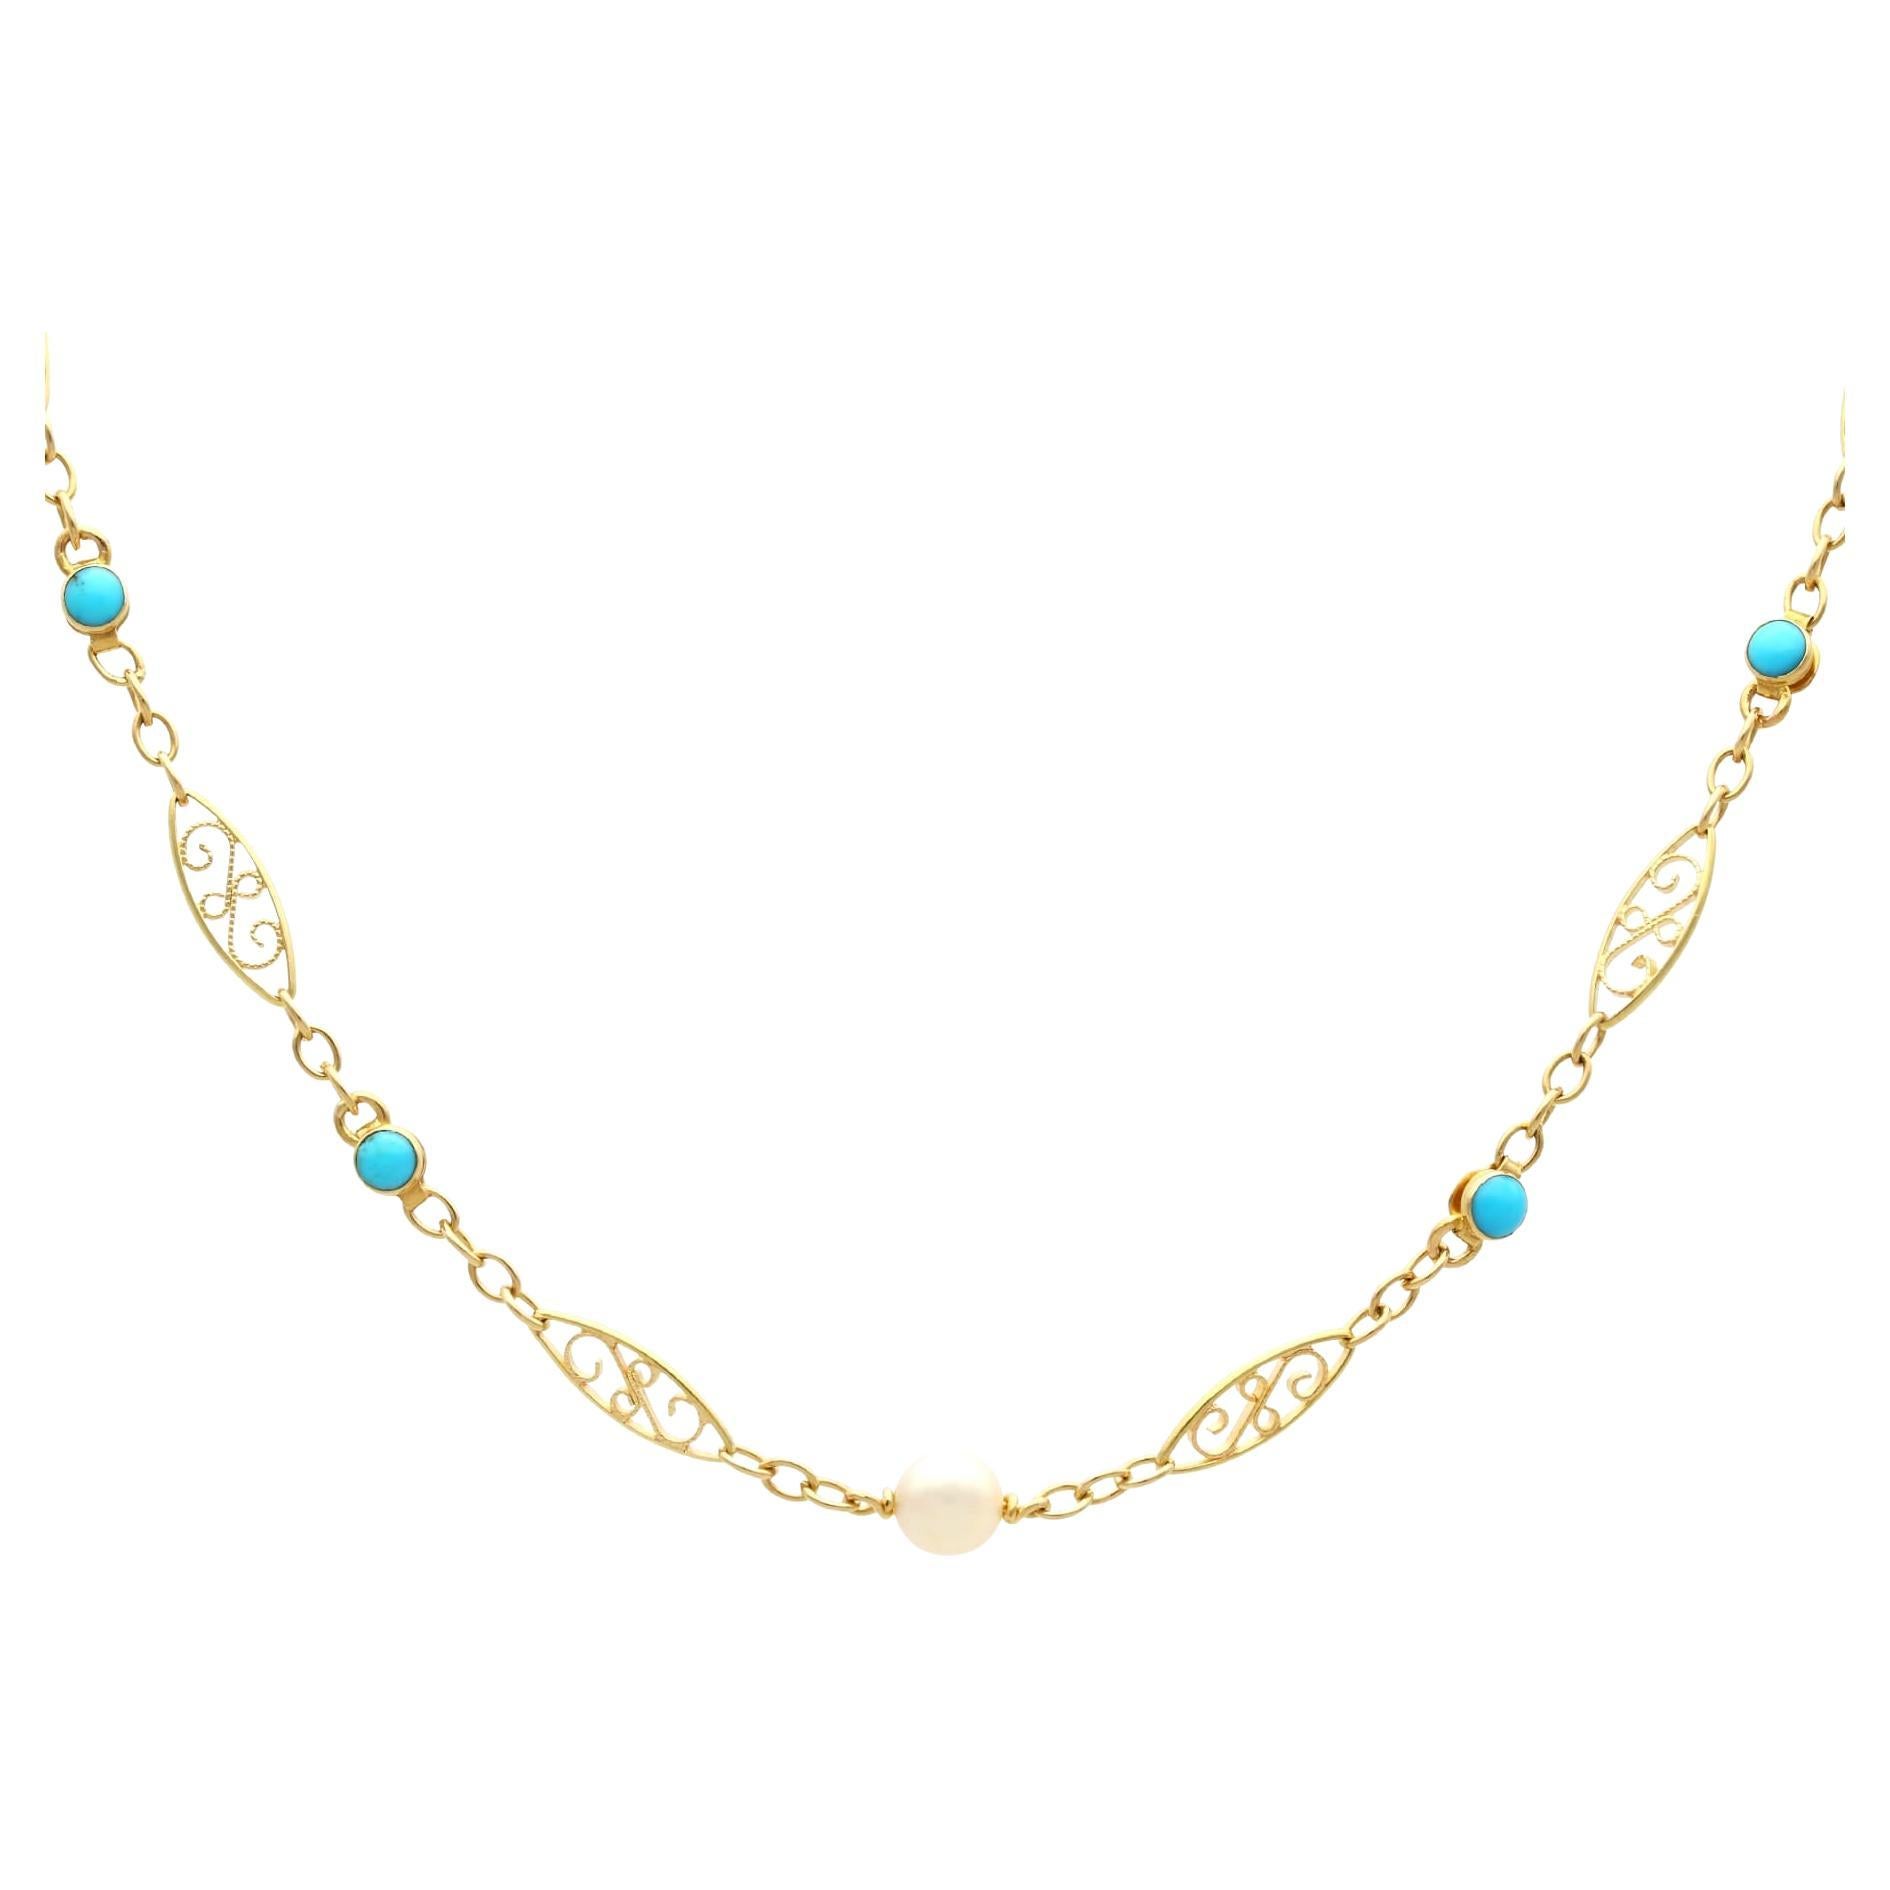 Vintage 3.12 Carat Turquoise and Cultured Pearl 18k Yellow Gold Longuard Chain For Sale